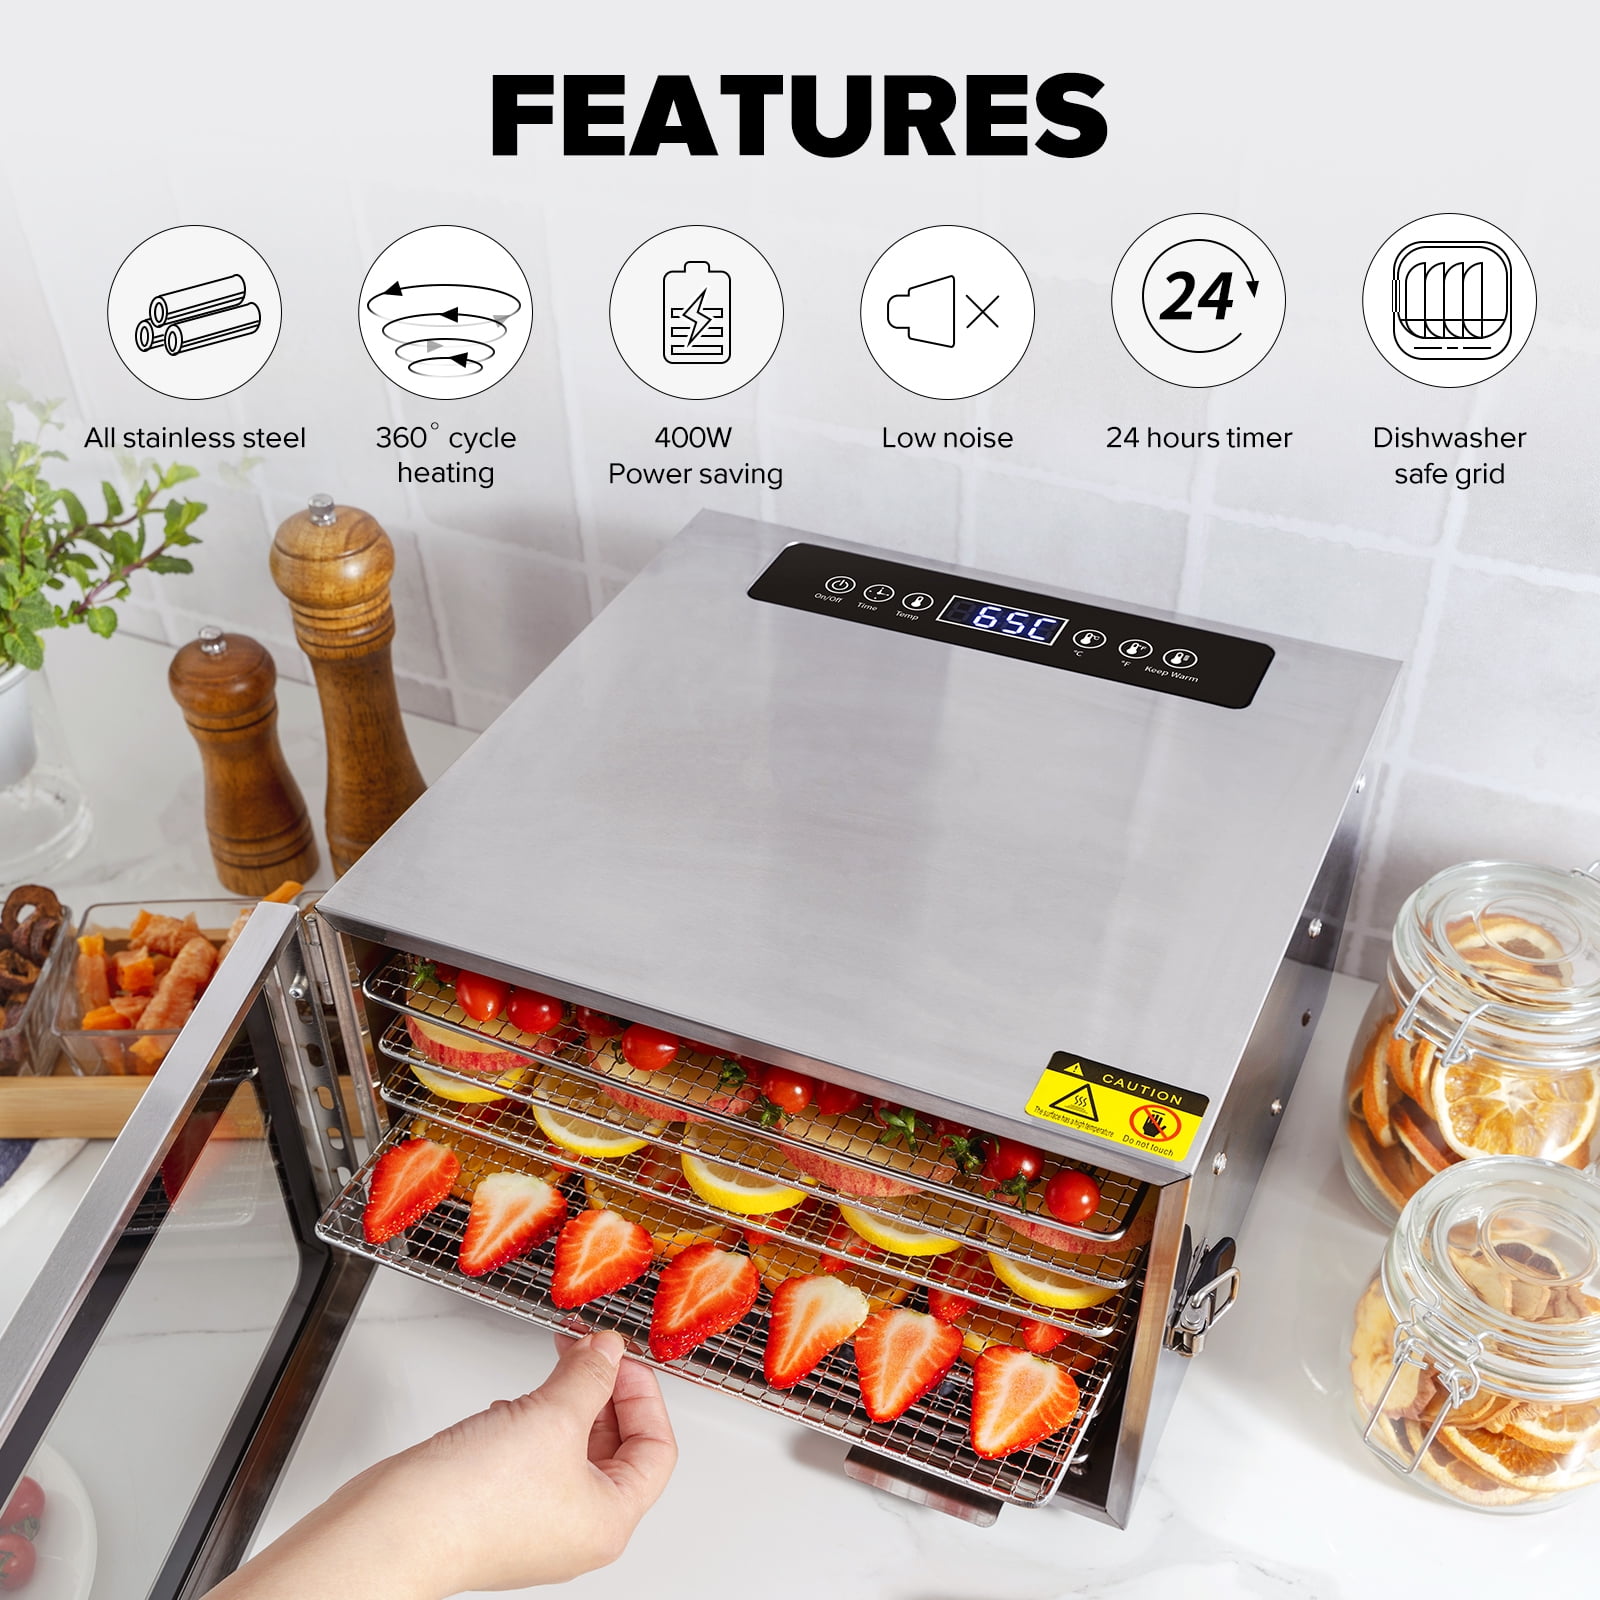 Kwasyo 8 Layers Food Dehydrator Beef Jerky Dryer, ALL Stainless